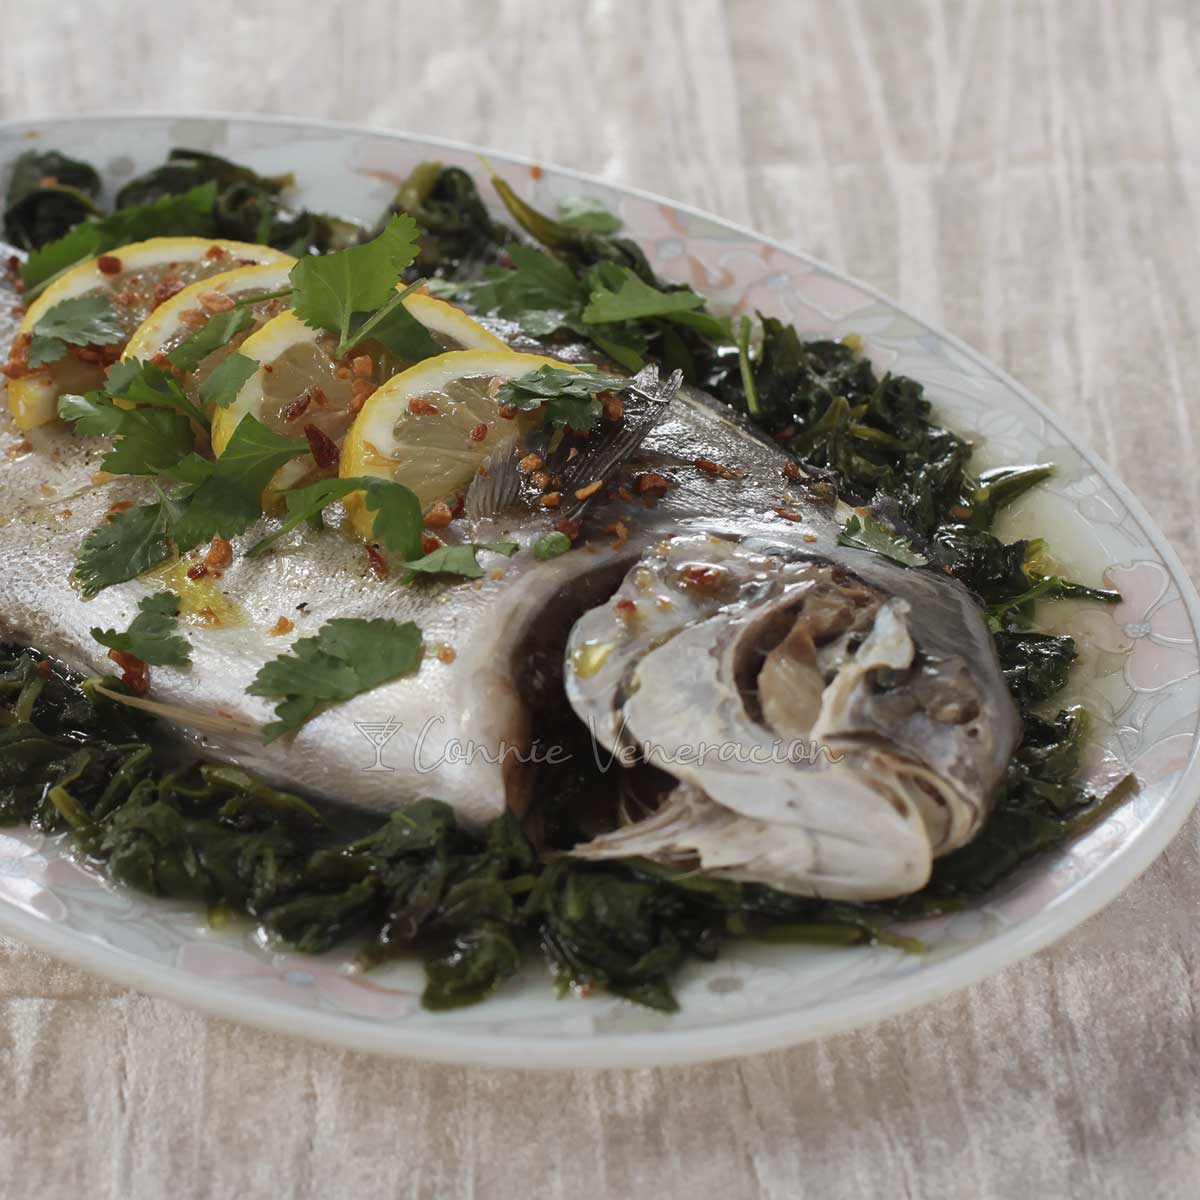 Steamed Whole Fish With Lemon and Olive Oil